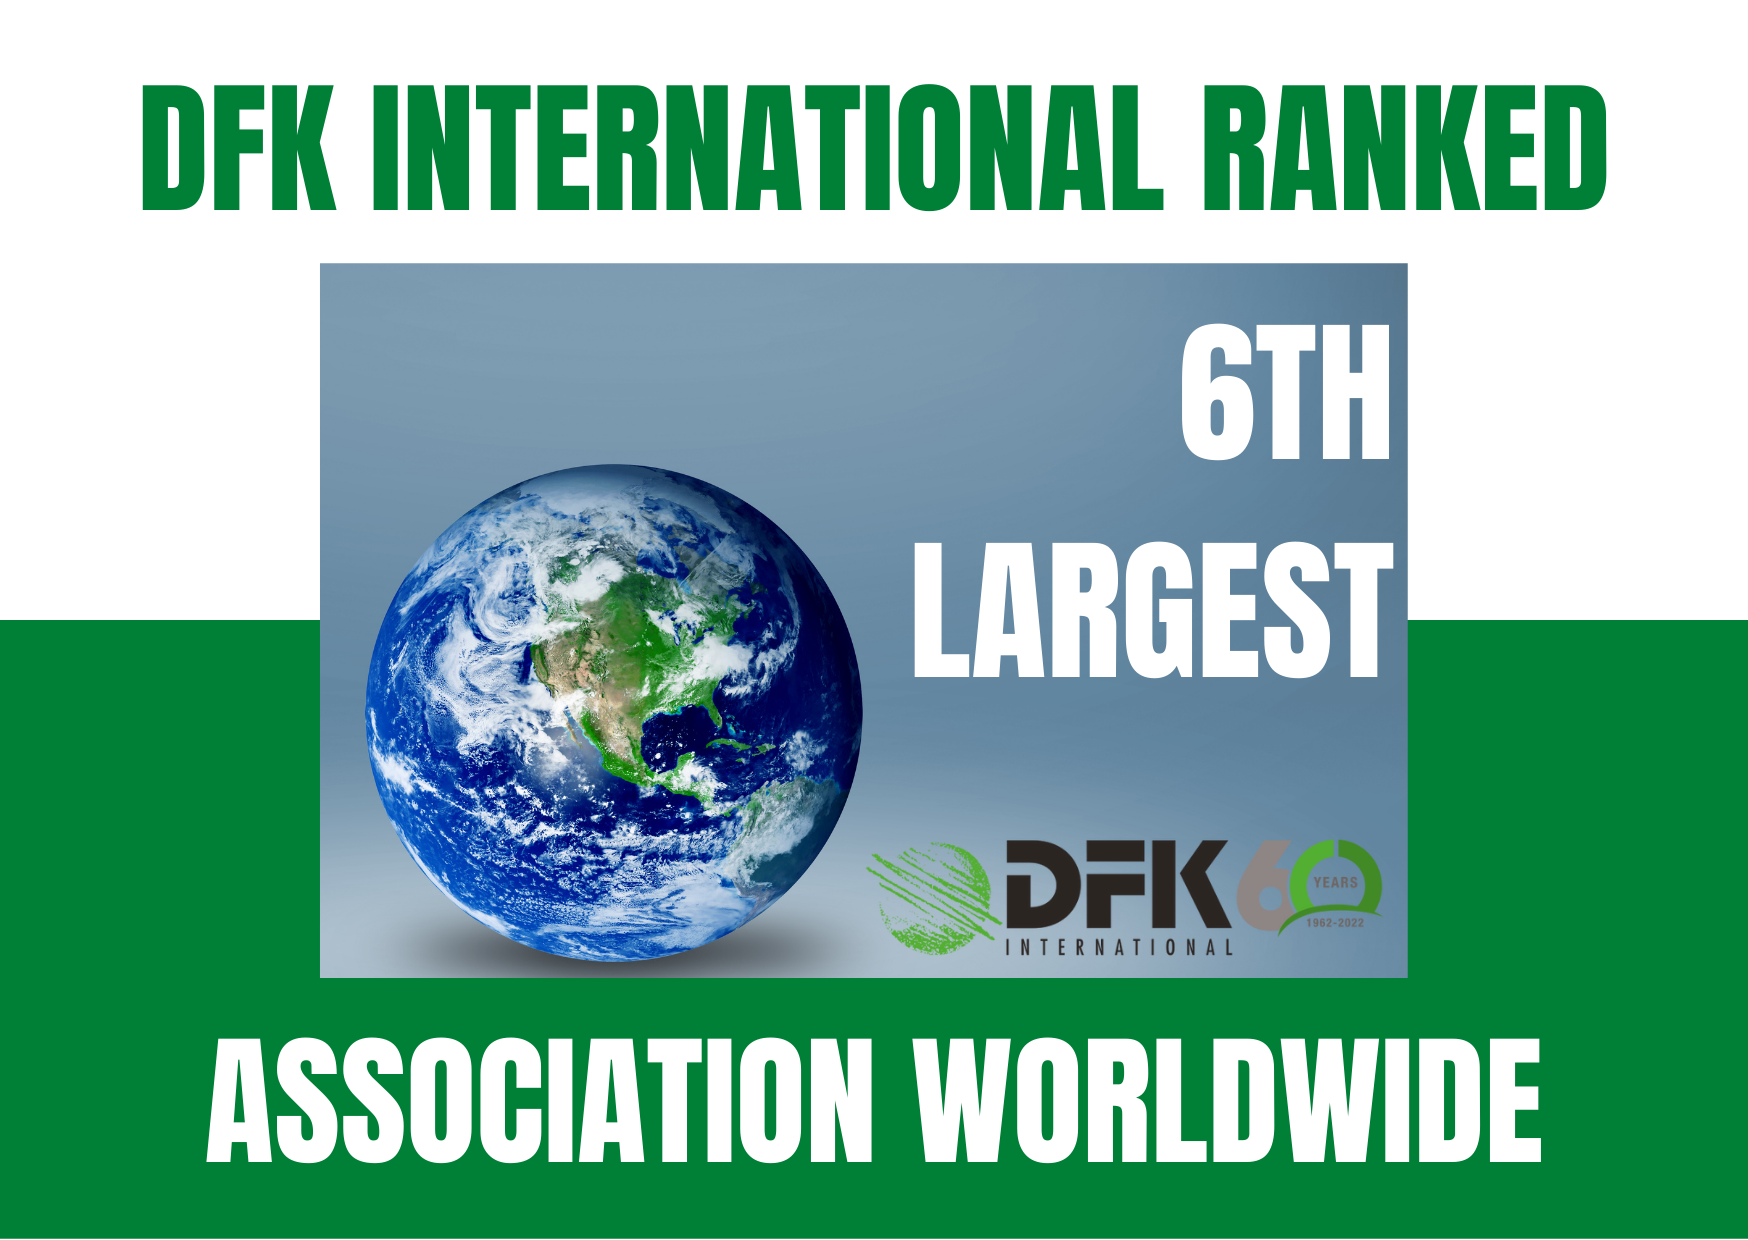 DFK ranked 6th largest